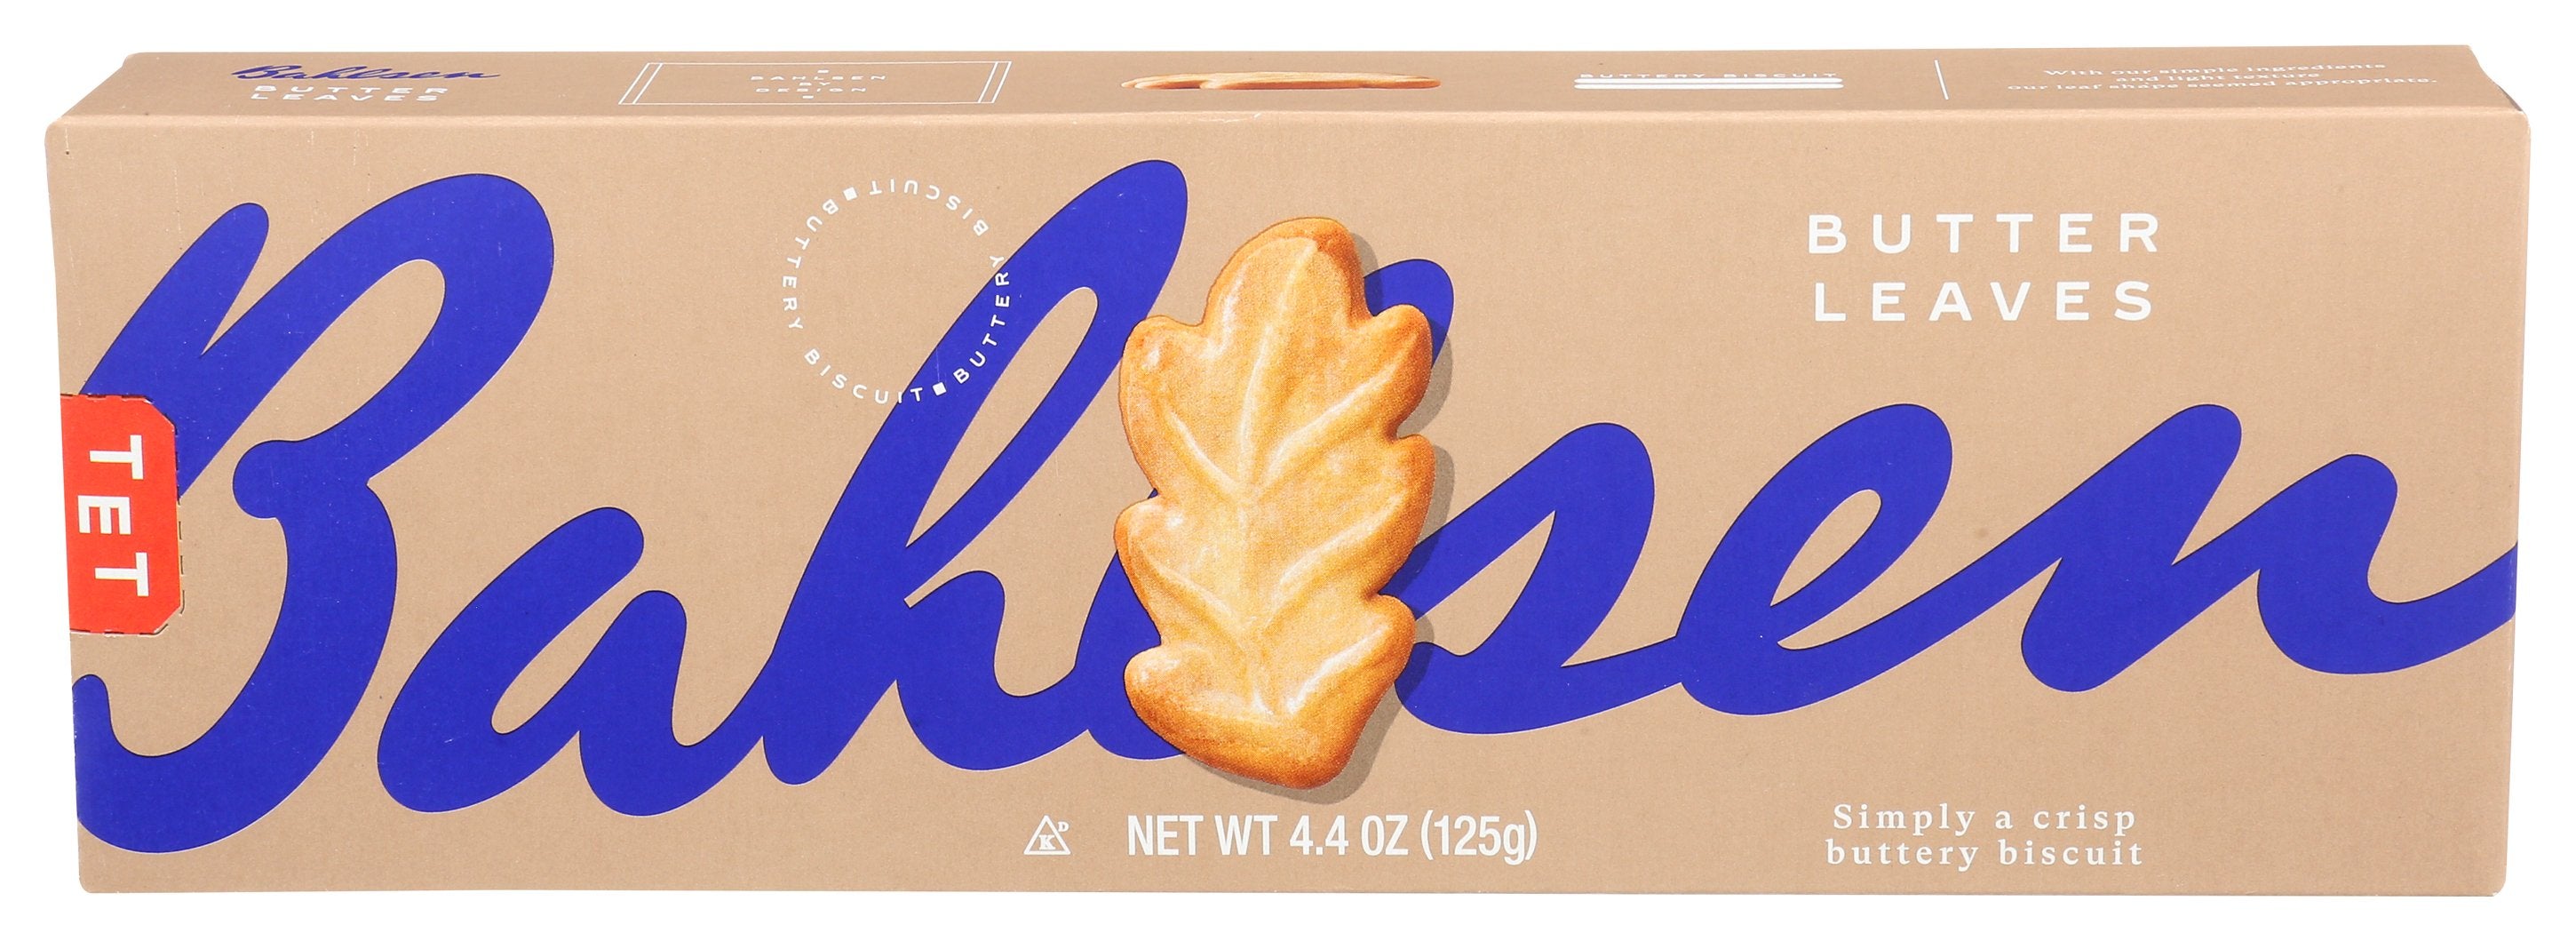 BAHLSEN COOKIE BUTTER LEAVES - Case of 12